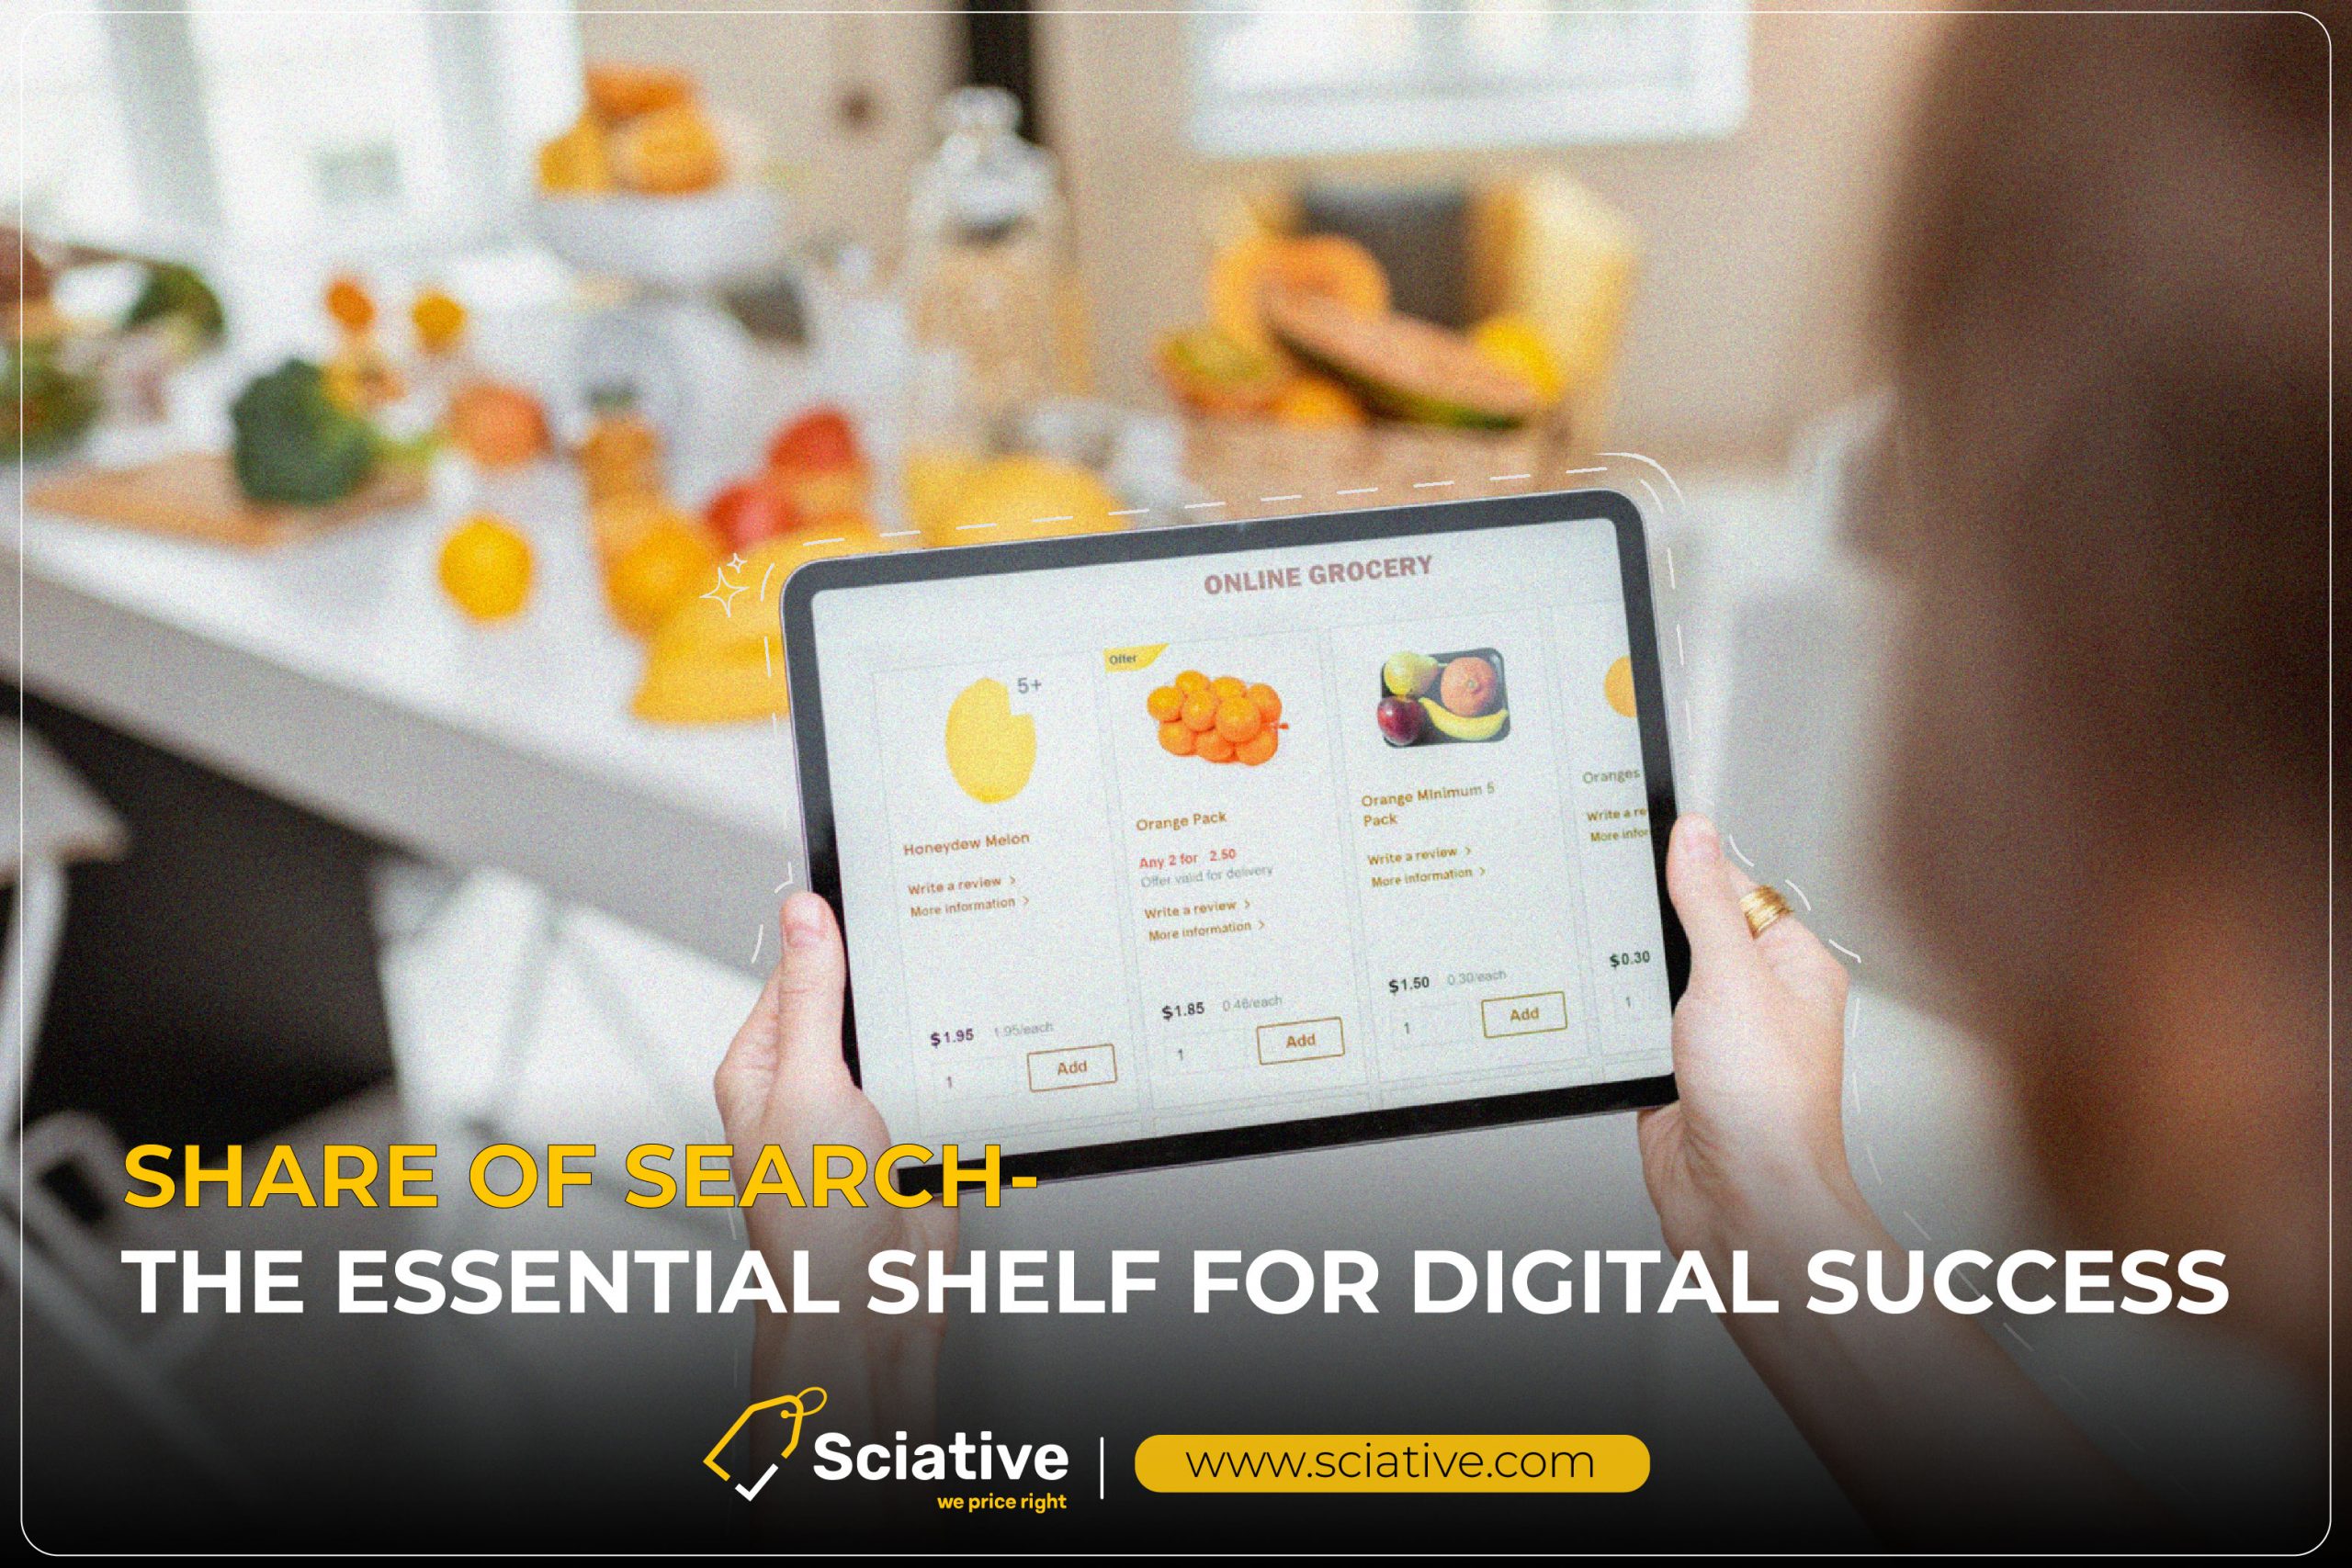 Share of Search – The Essential Shelf for Digital Success